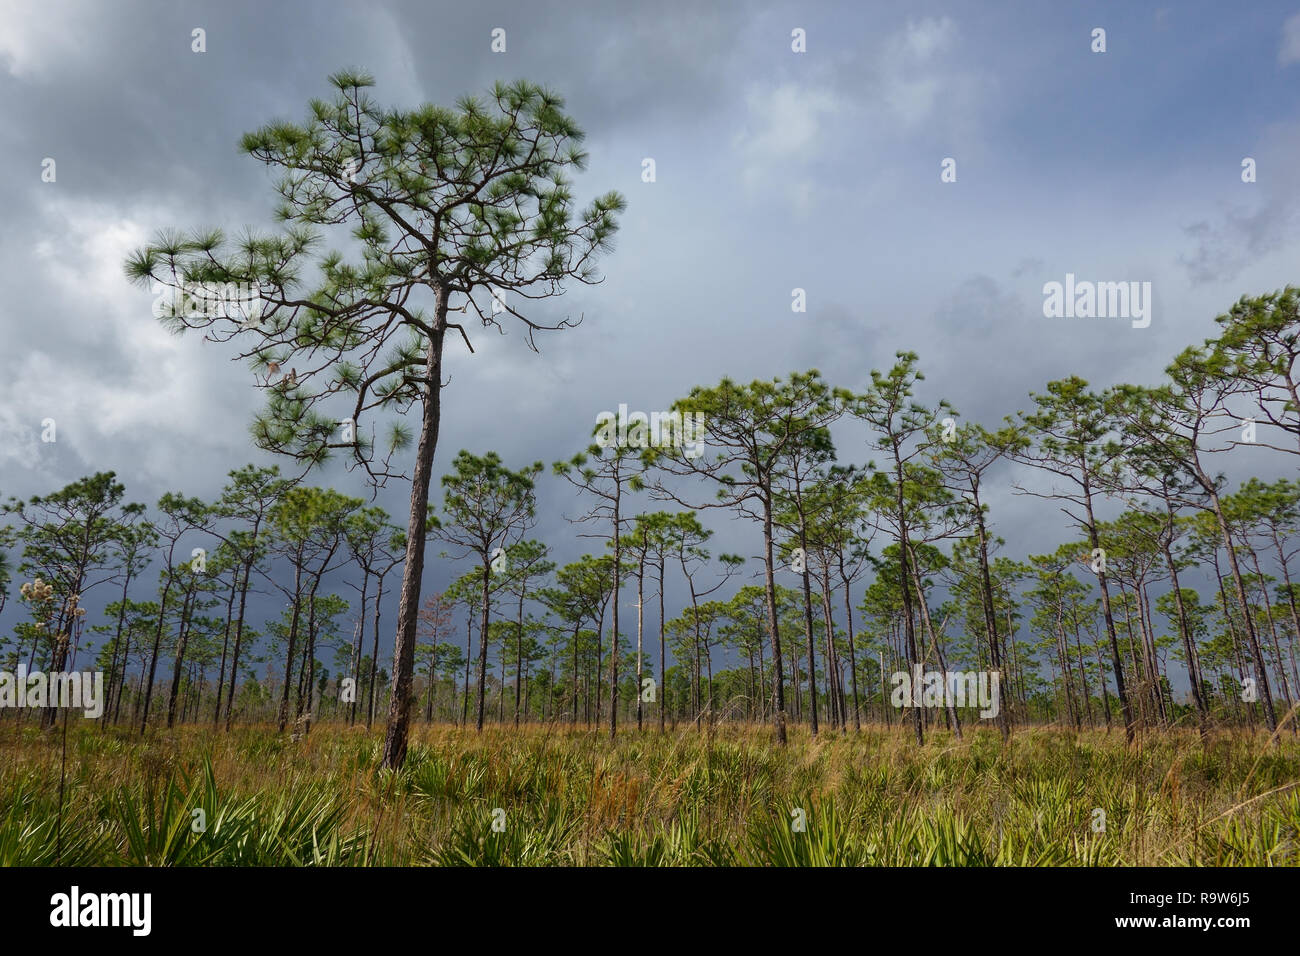 The view from the Pine Island East Loop trail in the Shingle Creek management area near Orlando, Florida, as a sudden storm rolls in. Stock Photo